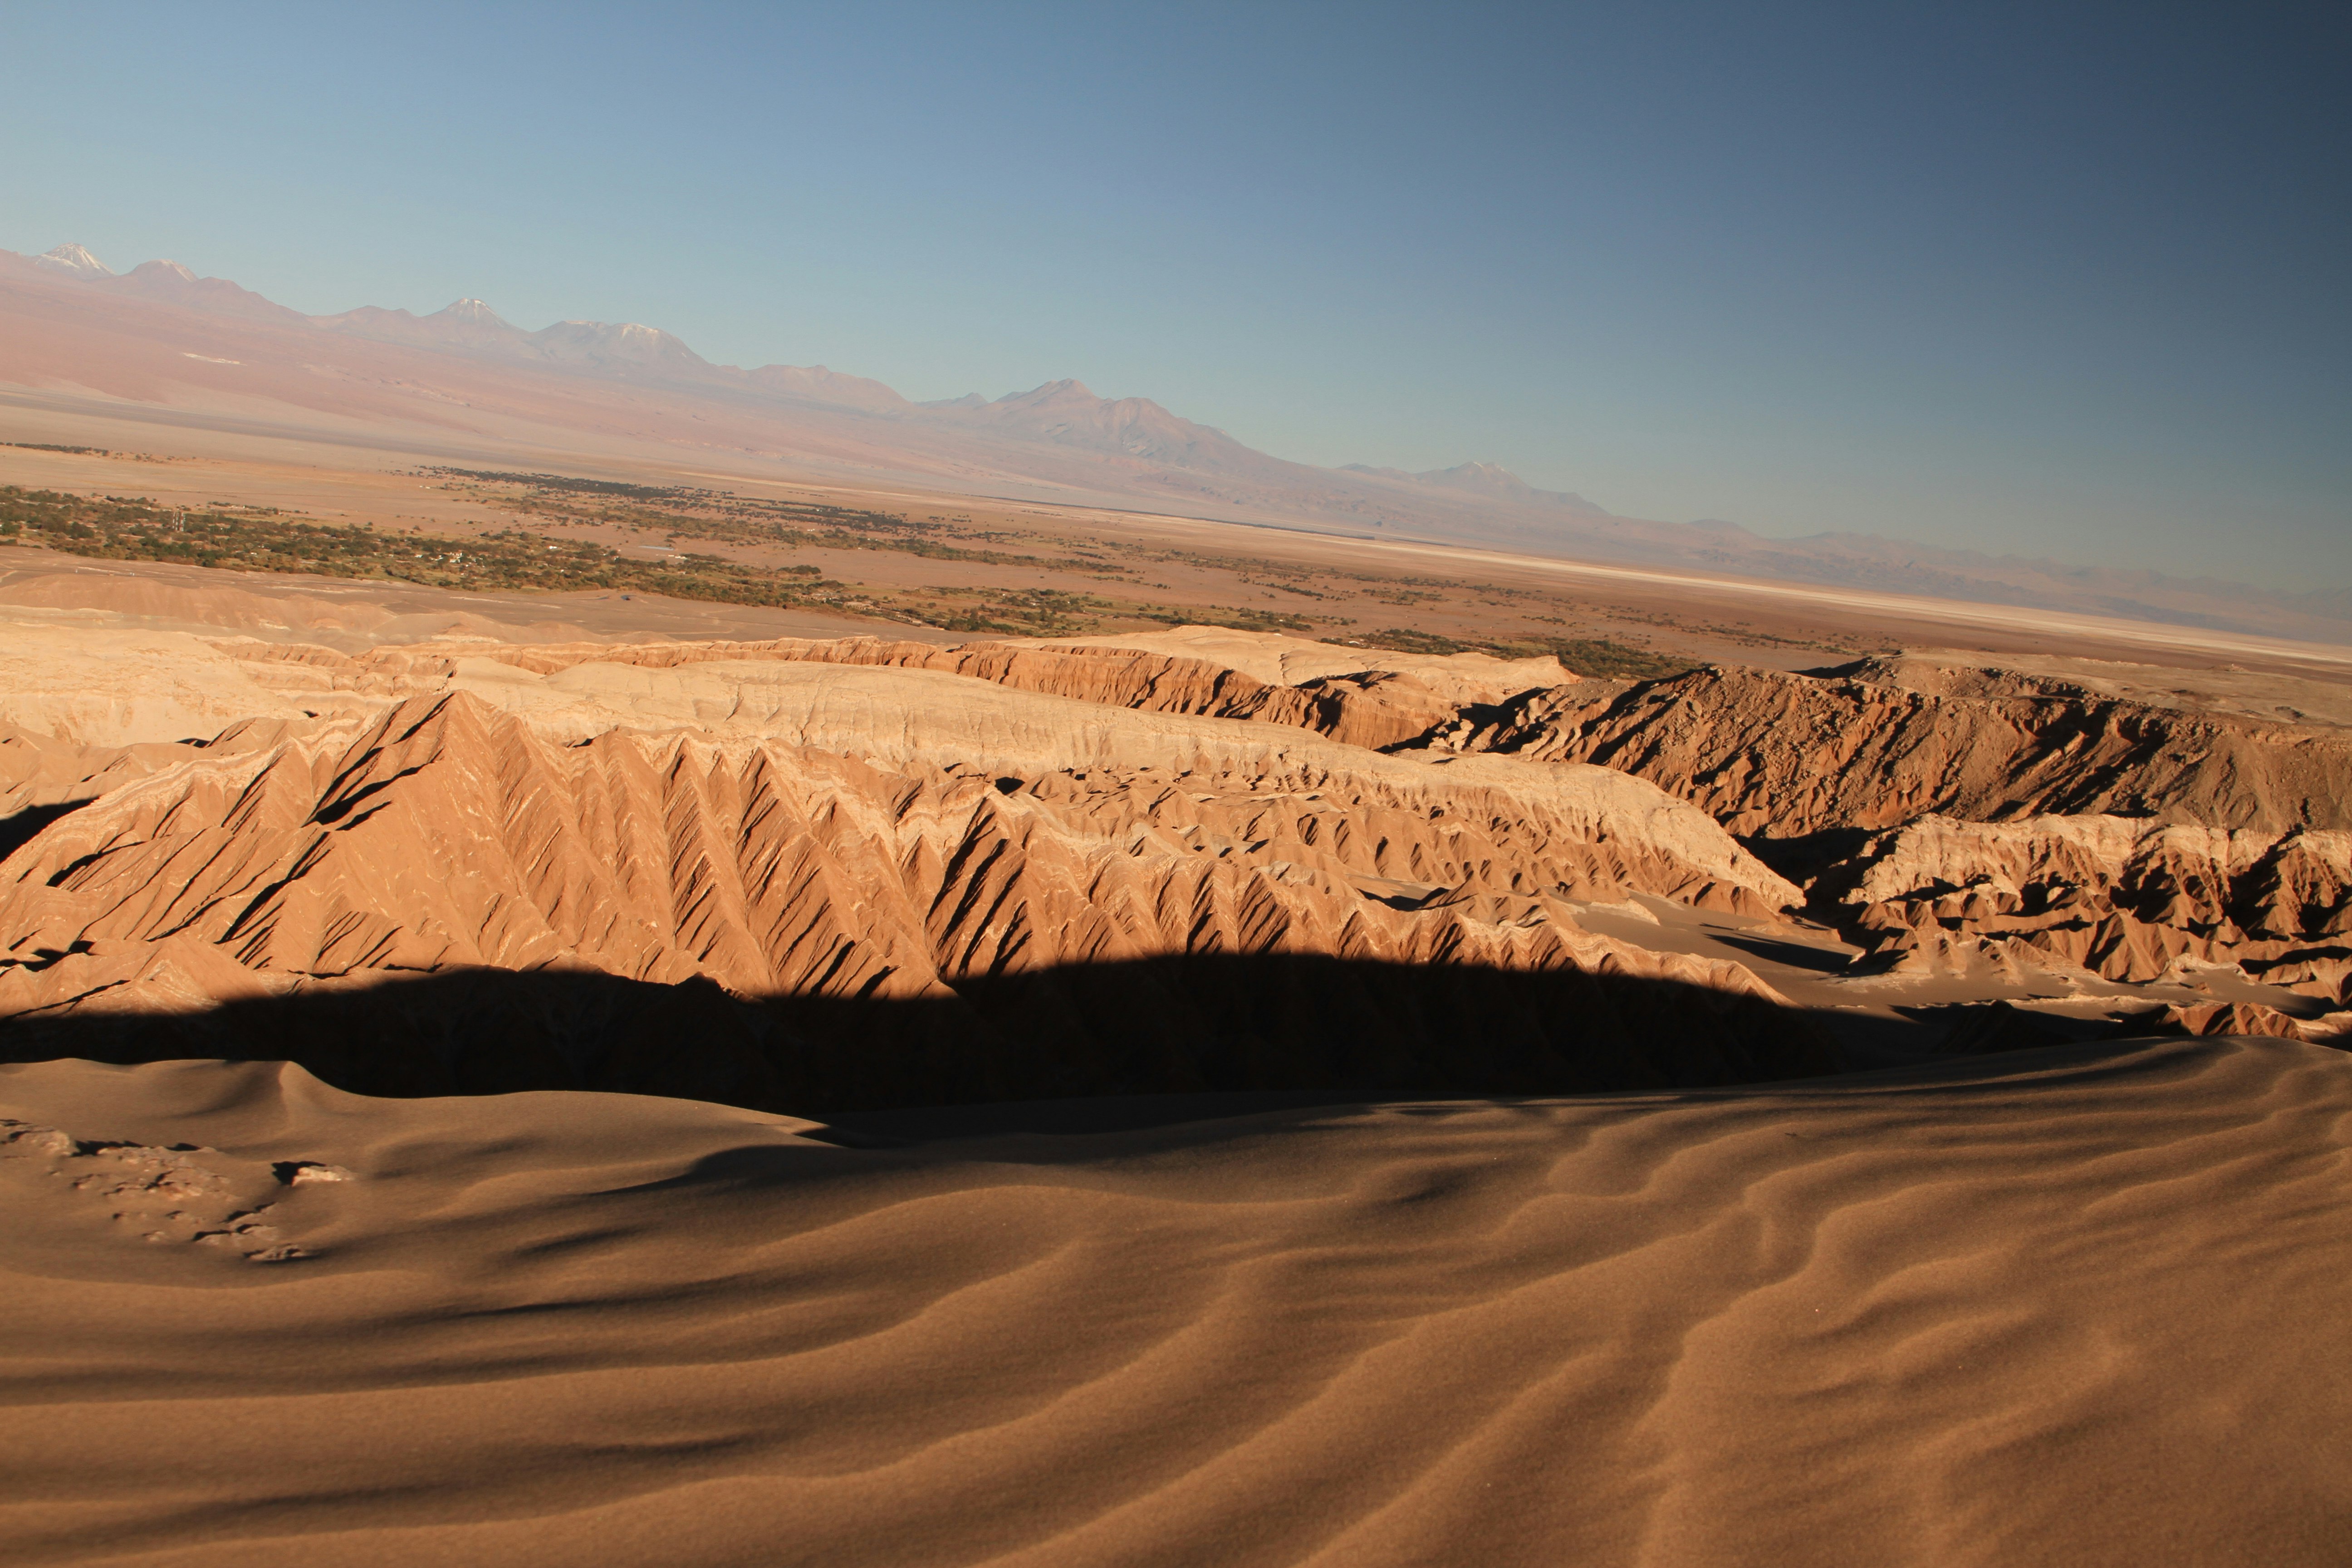 Wide view of a collection of peaked dunes stretching across an arid landscape